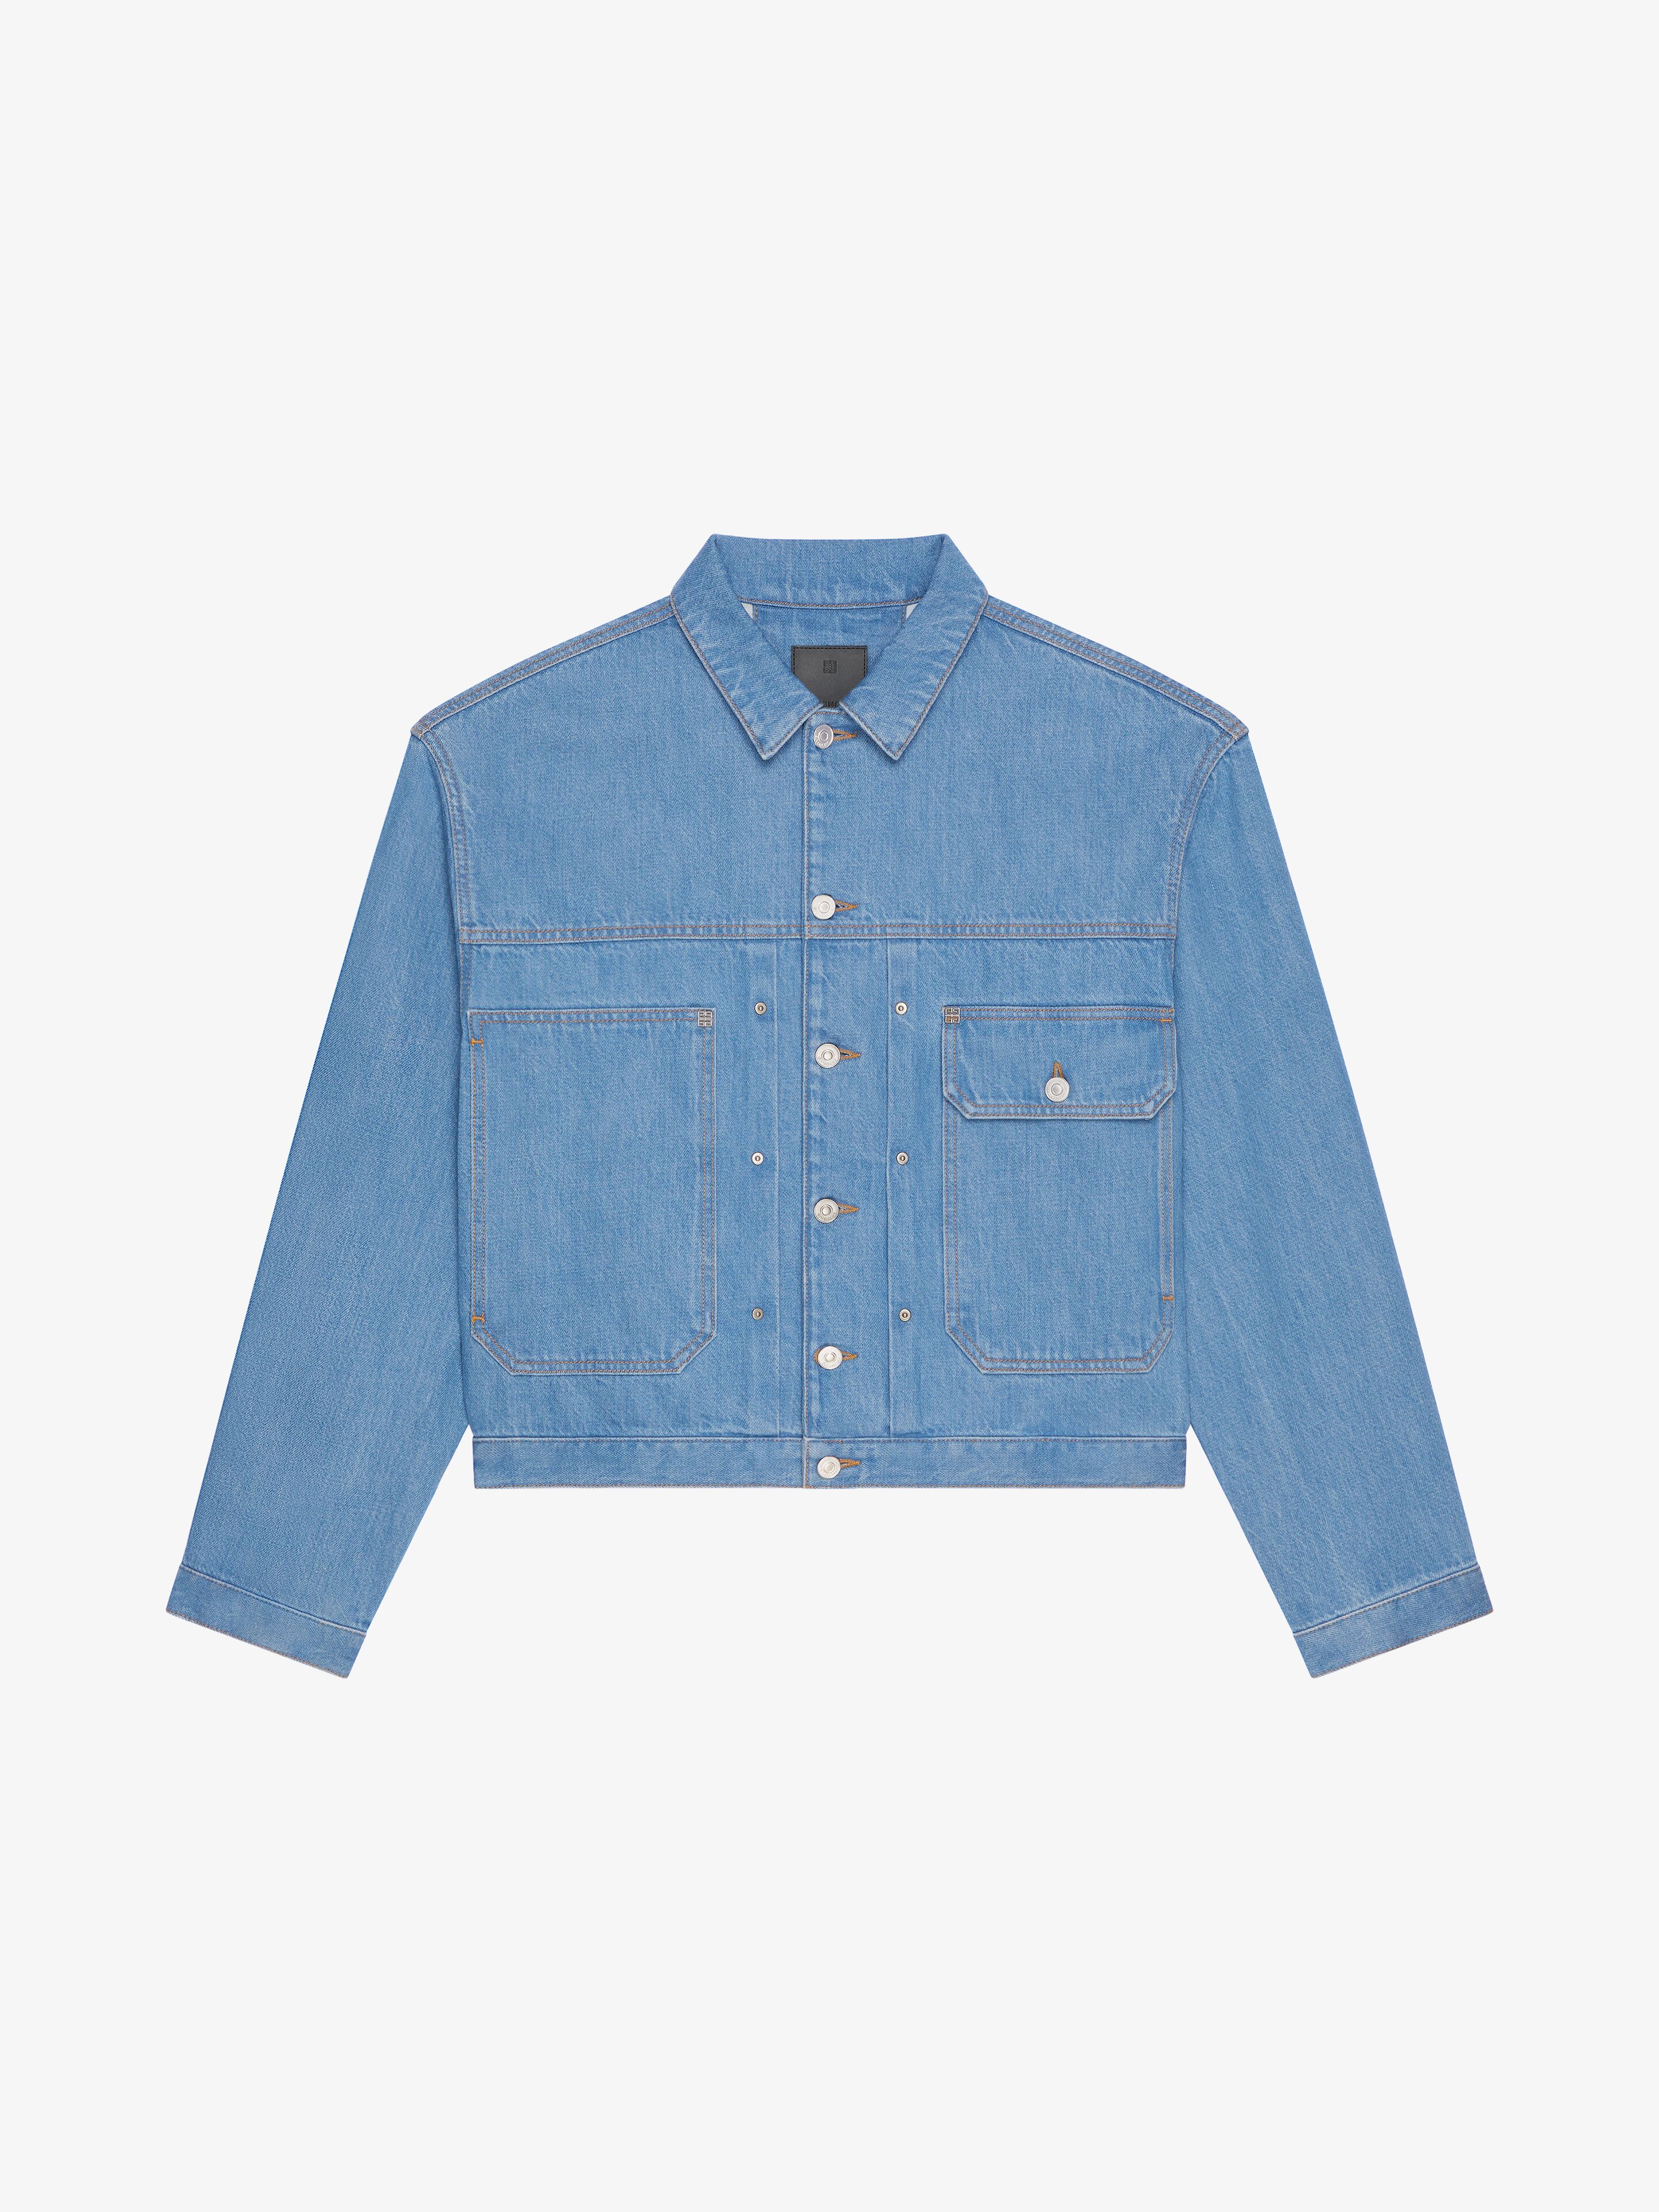 Givenchy Jacket In Denim In Blue